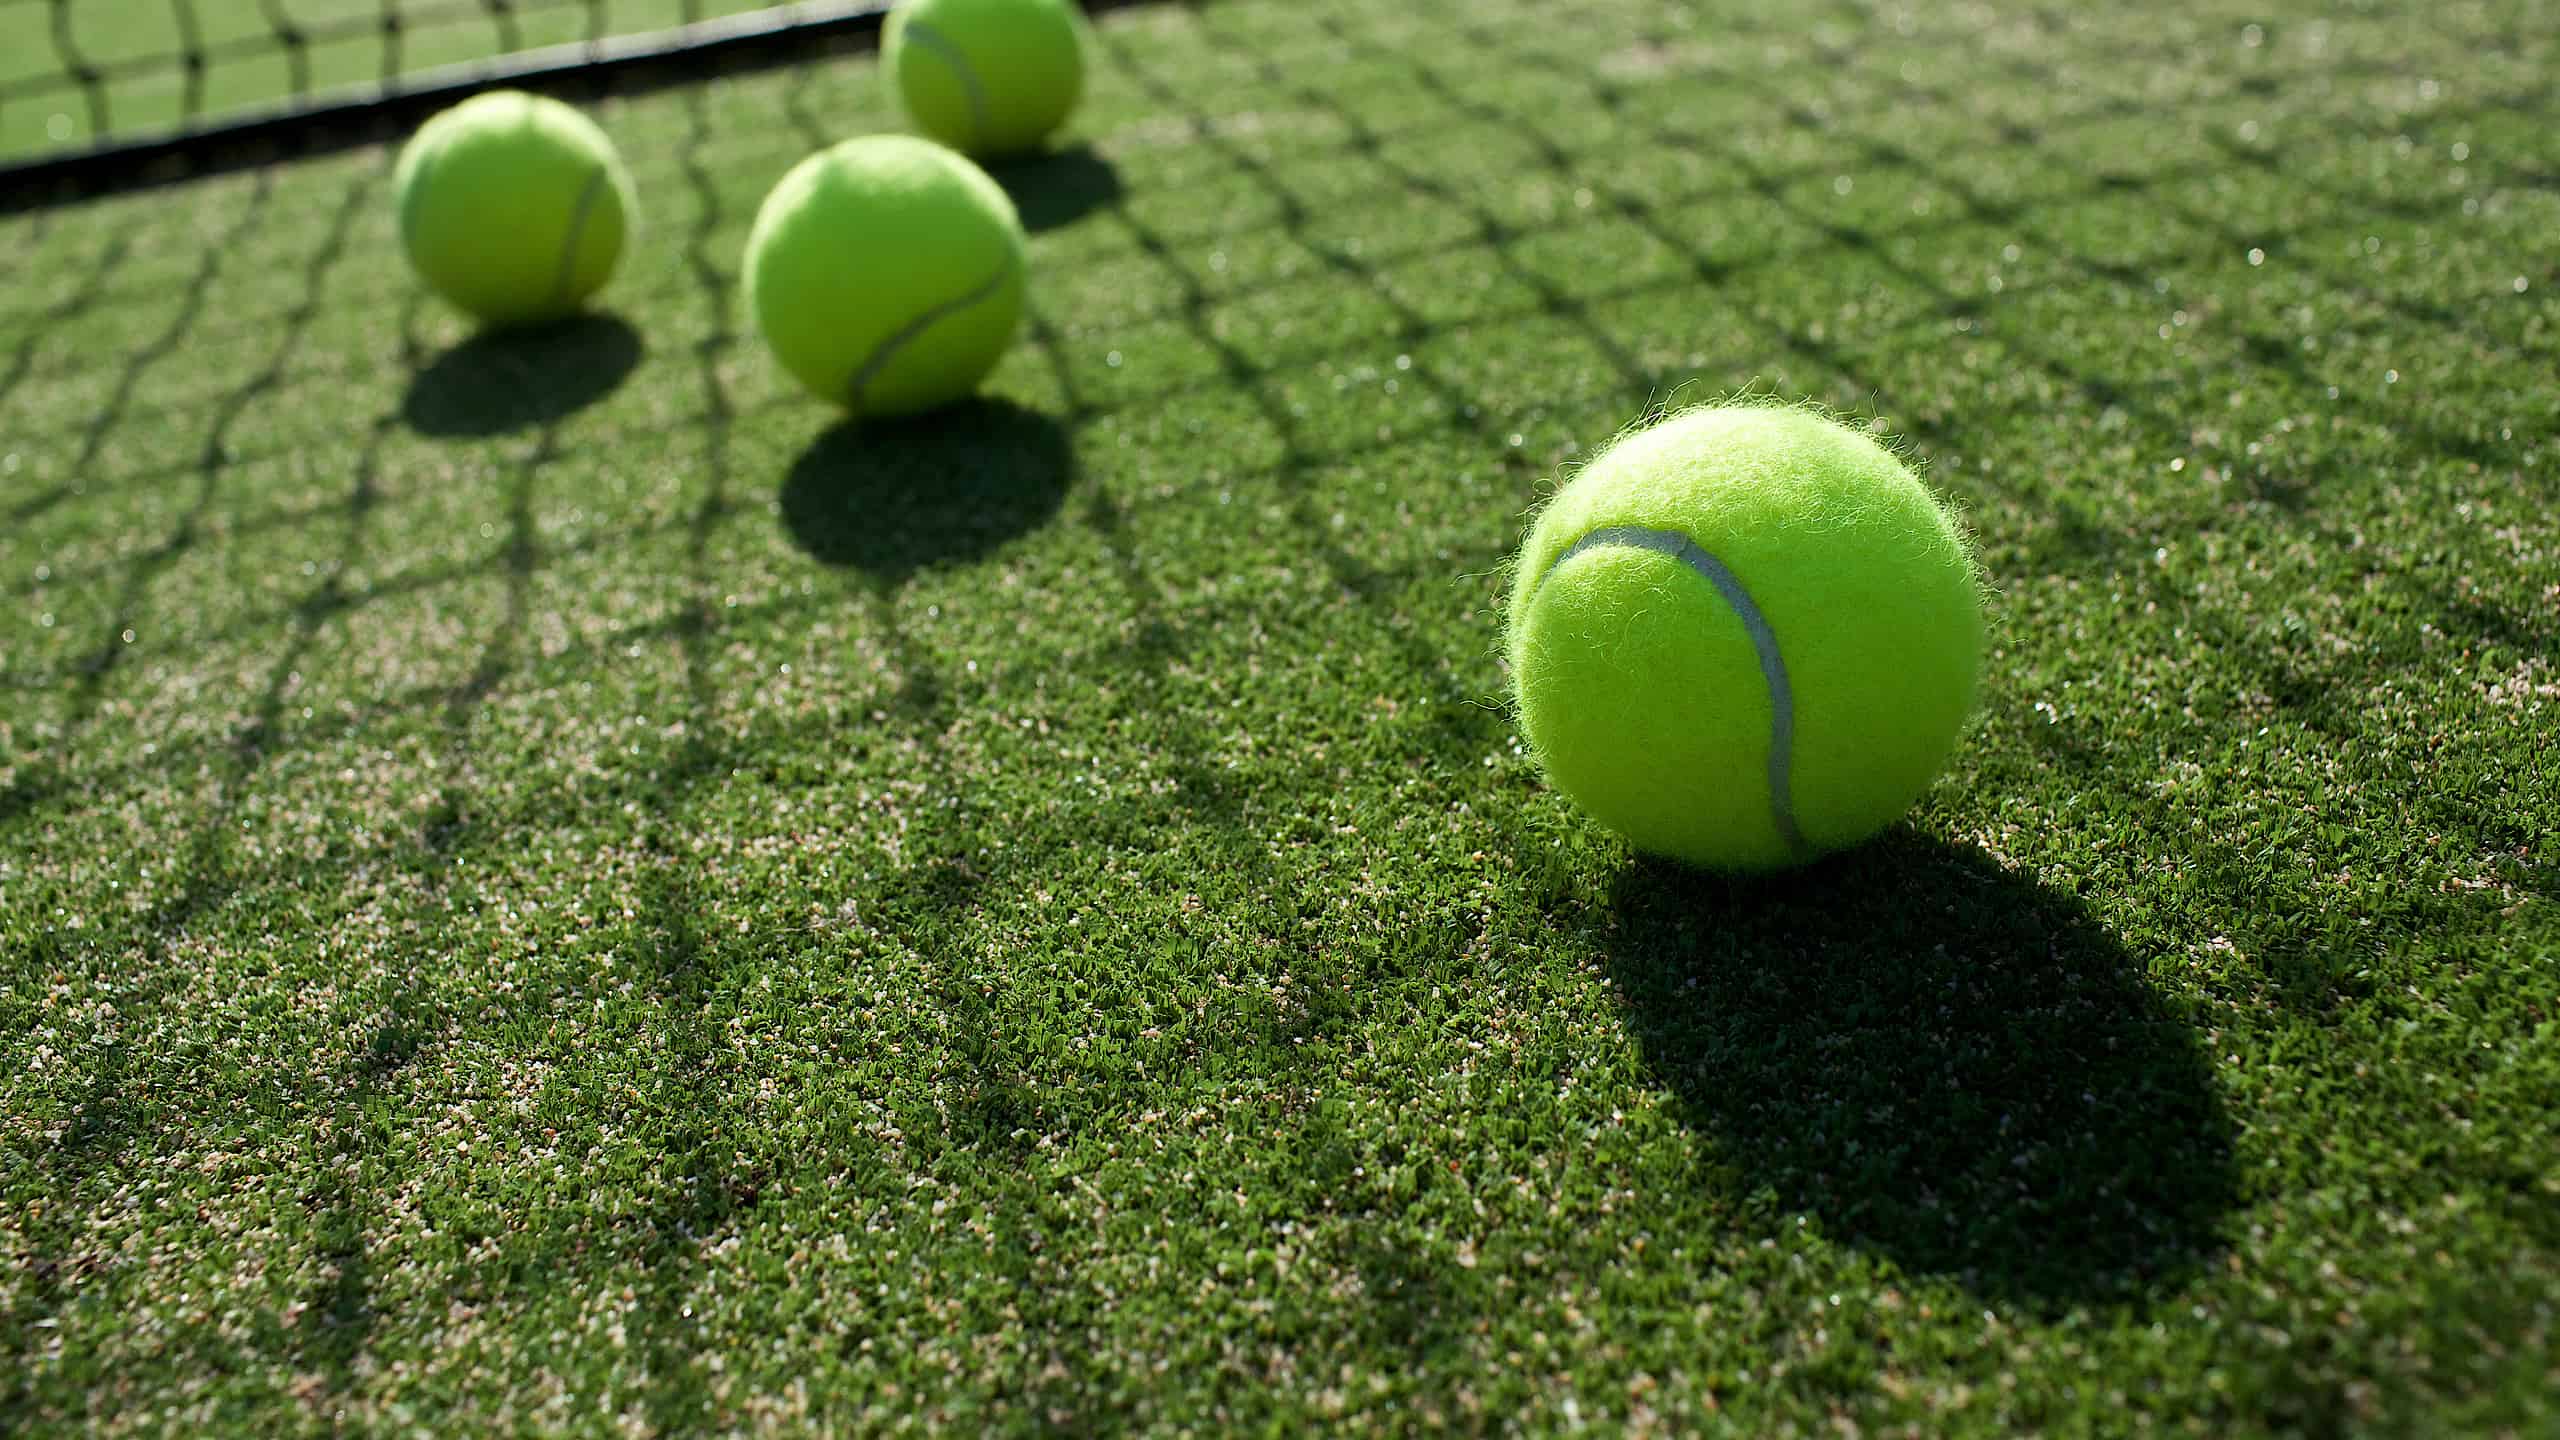 four bright tennis balls are visible on a green grass court. The net is visible toward the back odf the frame. The sun is shining through the nest casting a net shadow on the green grass and yellow balls.